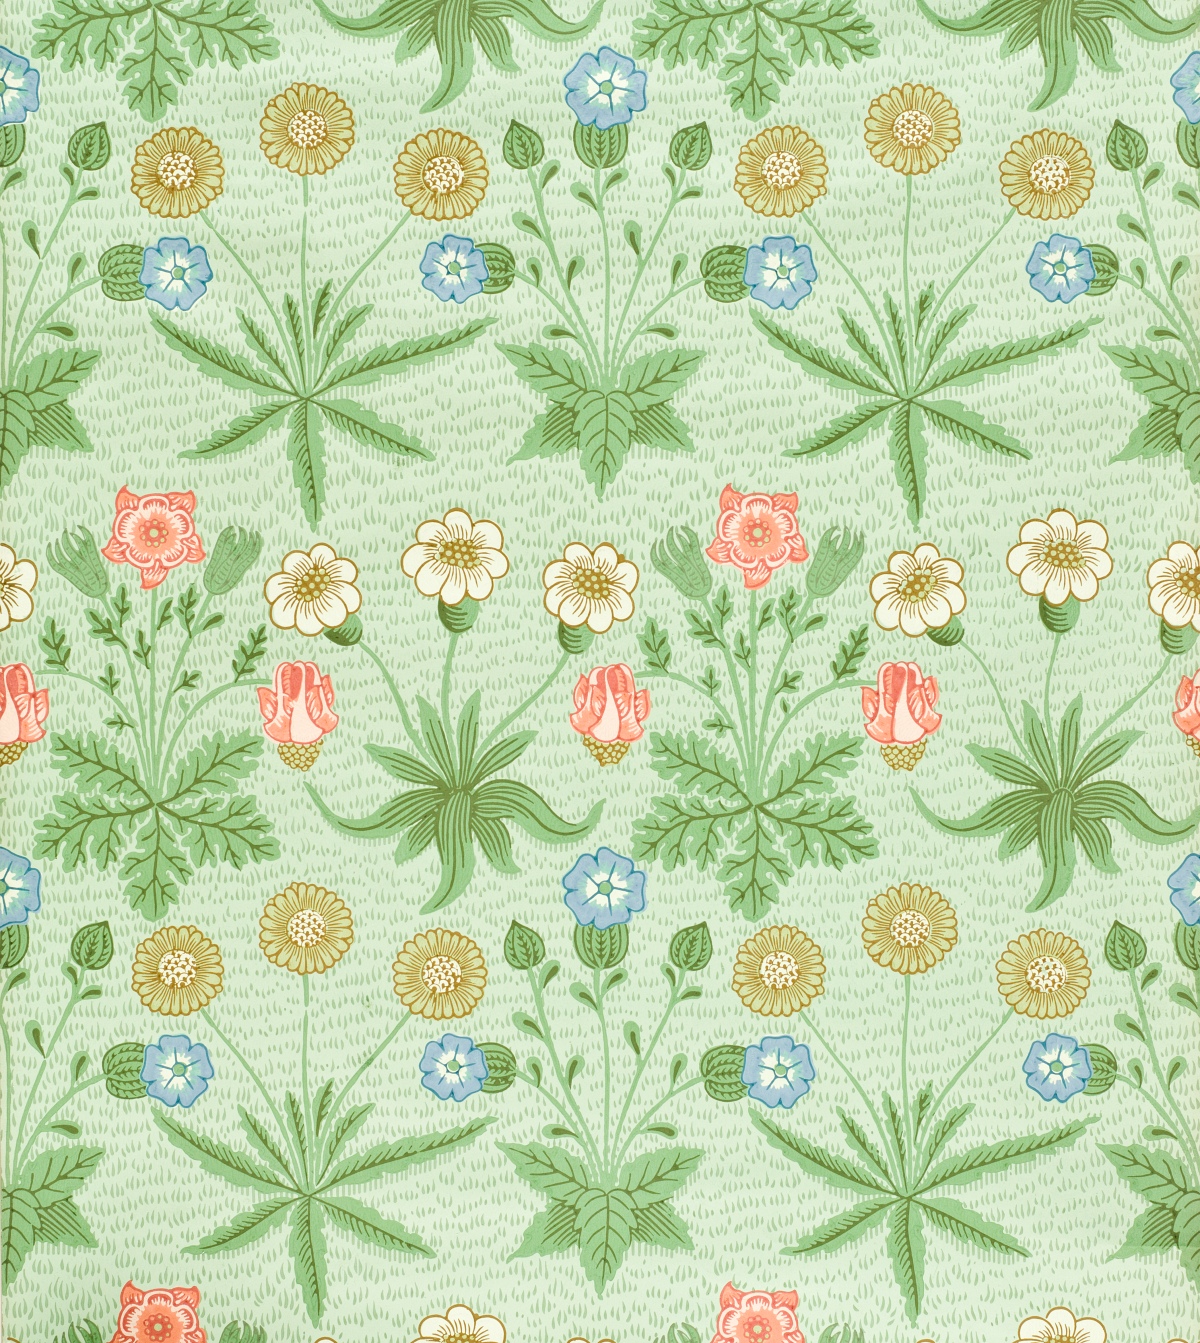 1860s Daisy wallpaper by William Morris